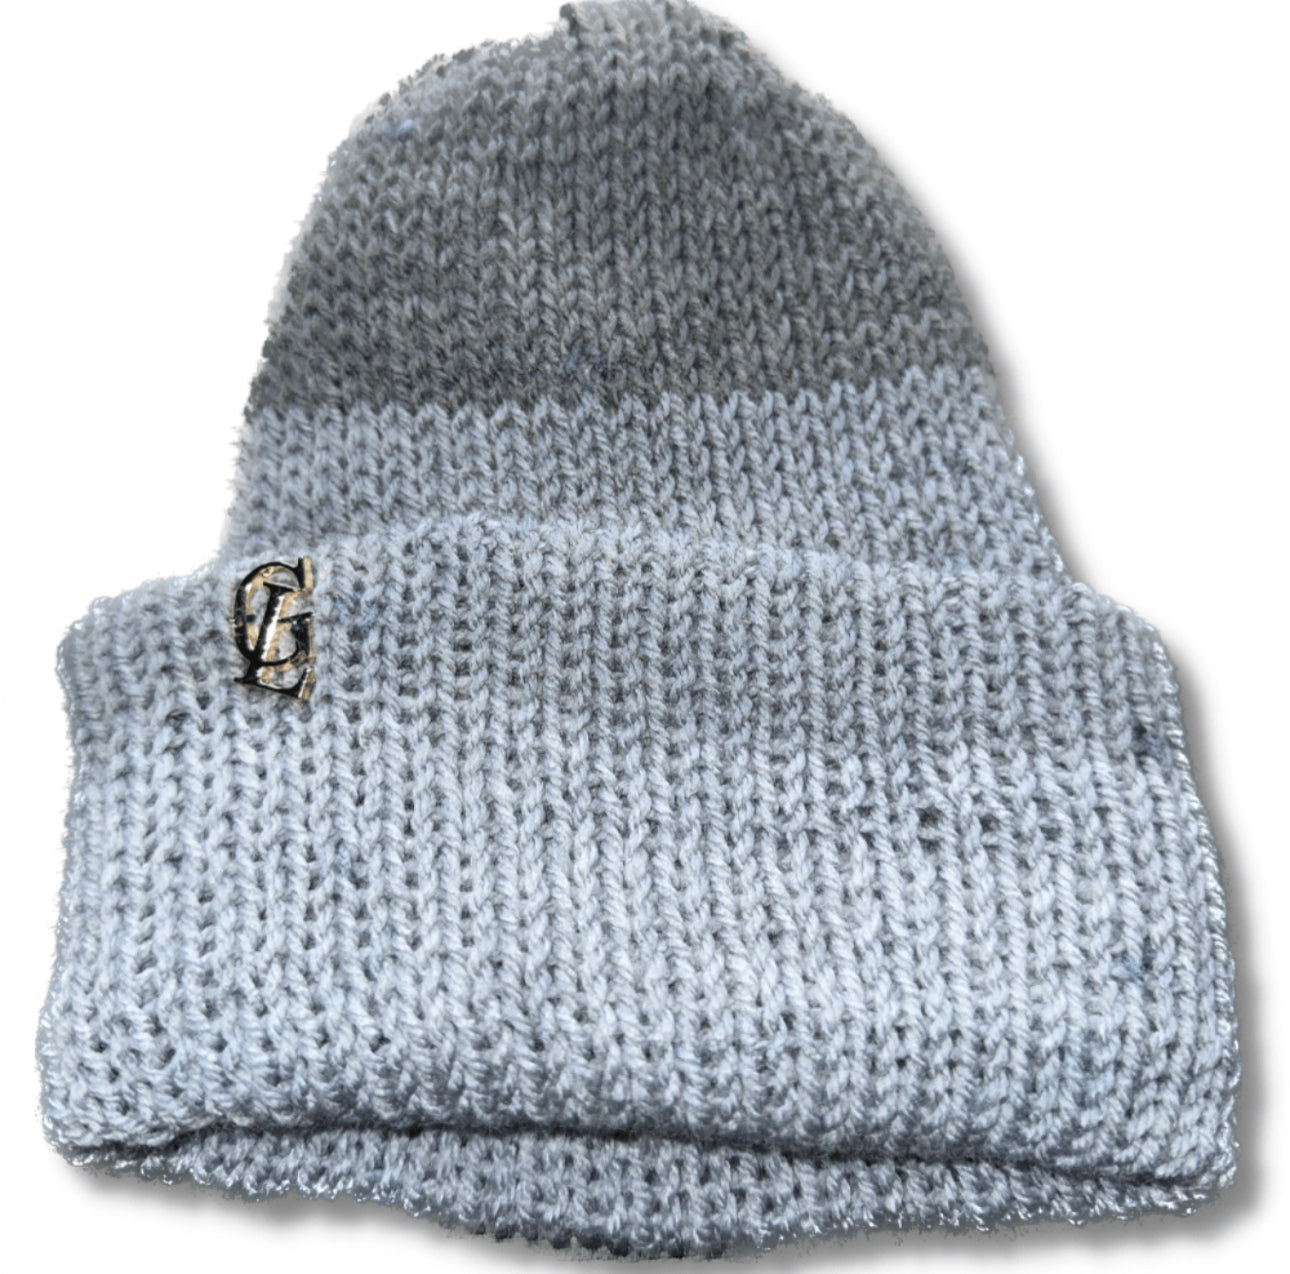 Blue and gray double layered beanie